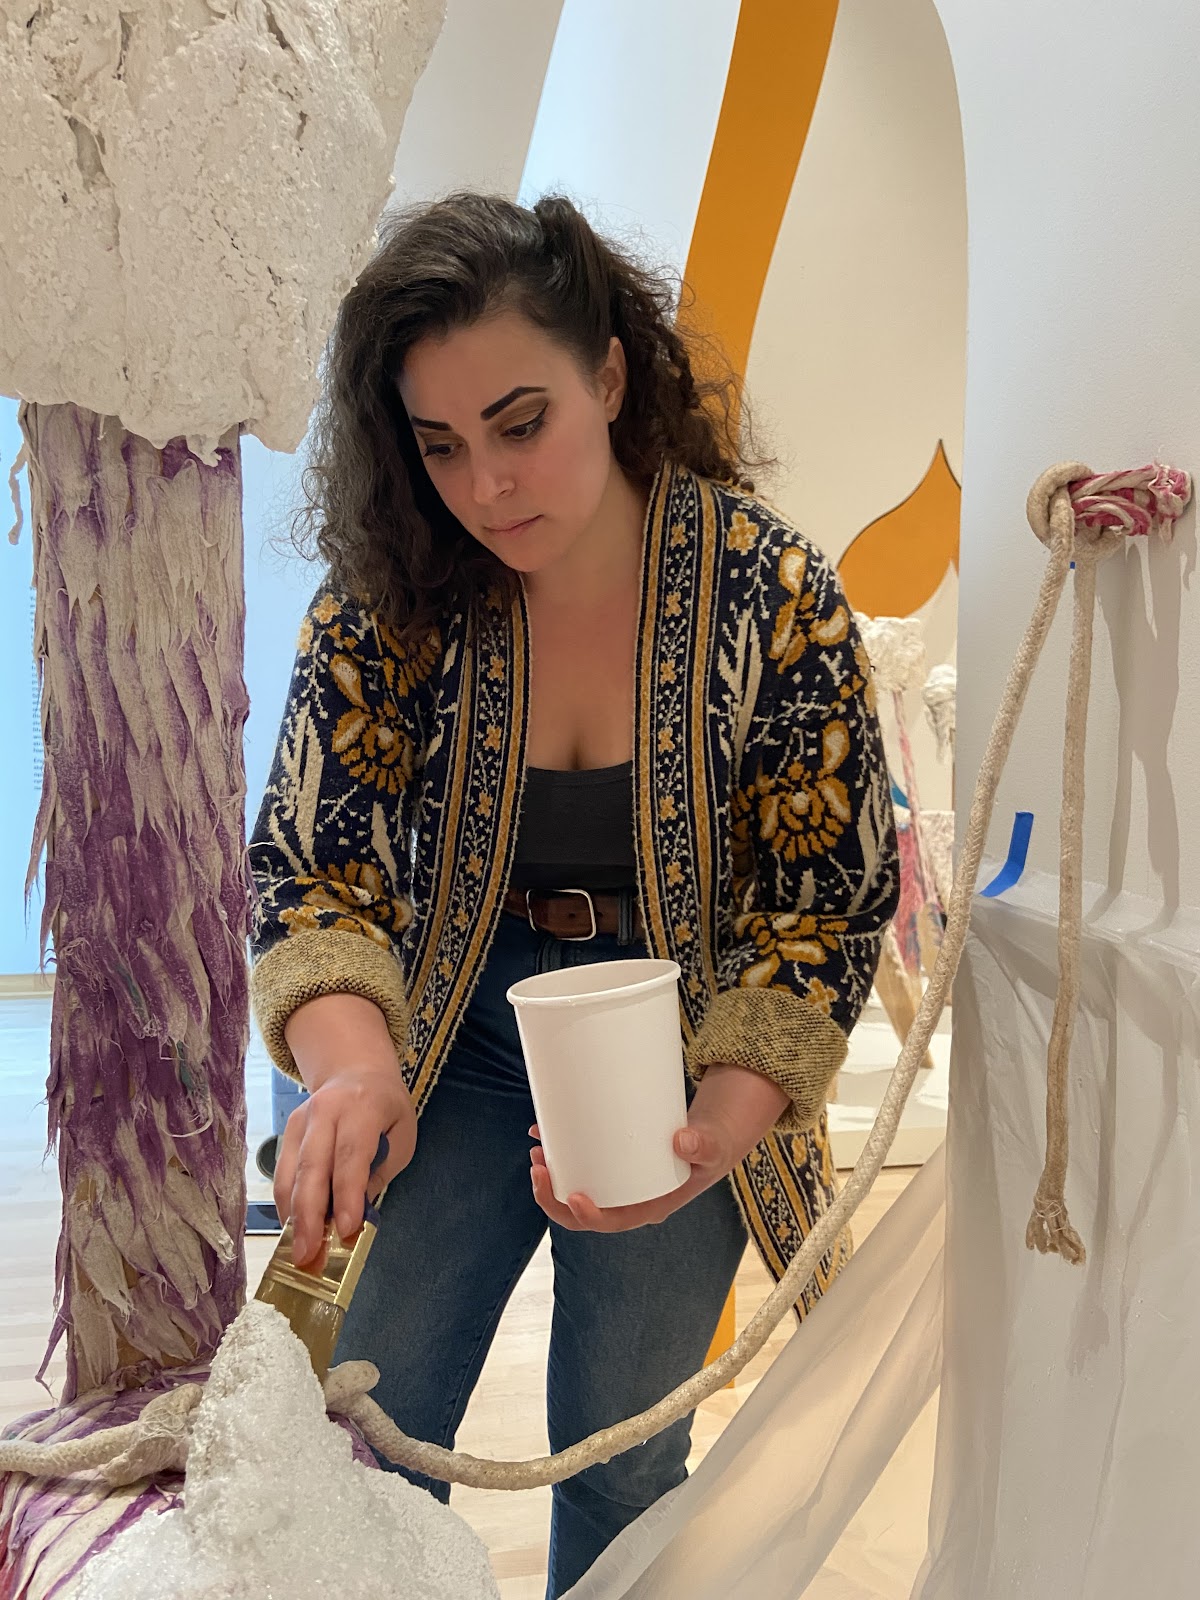 A photo of Yasmine Kasem holding a paint cup and a brush surrounded by sculpture and textile artworks.